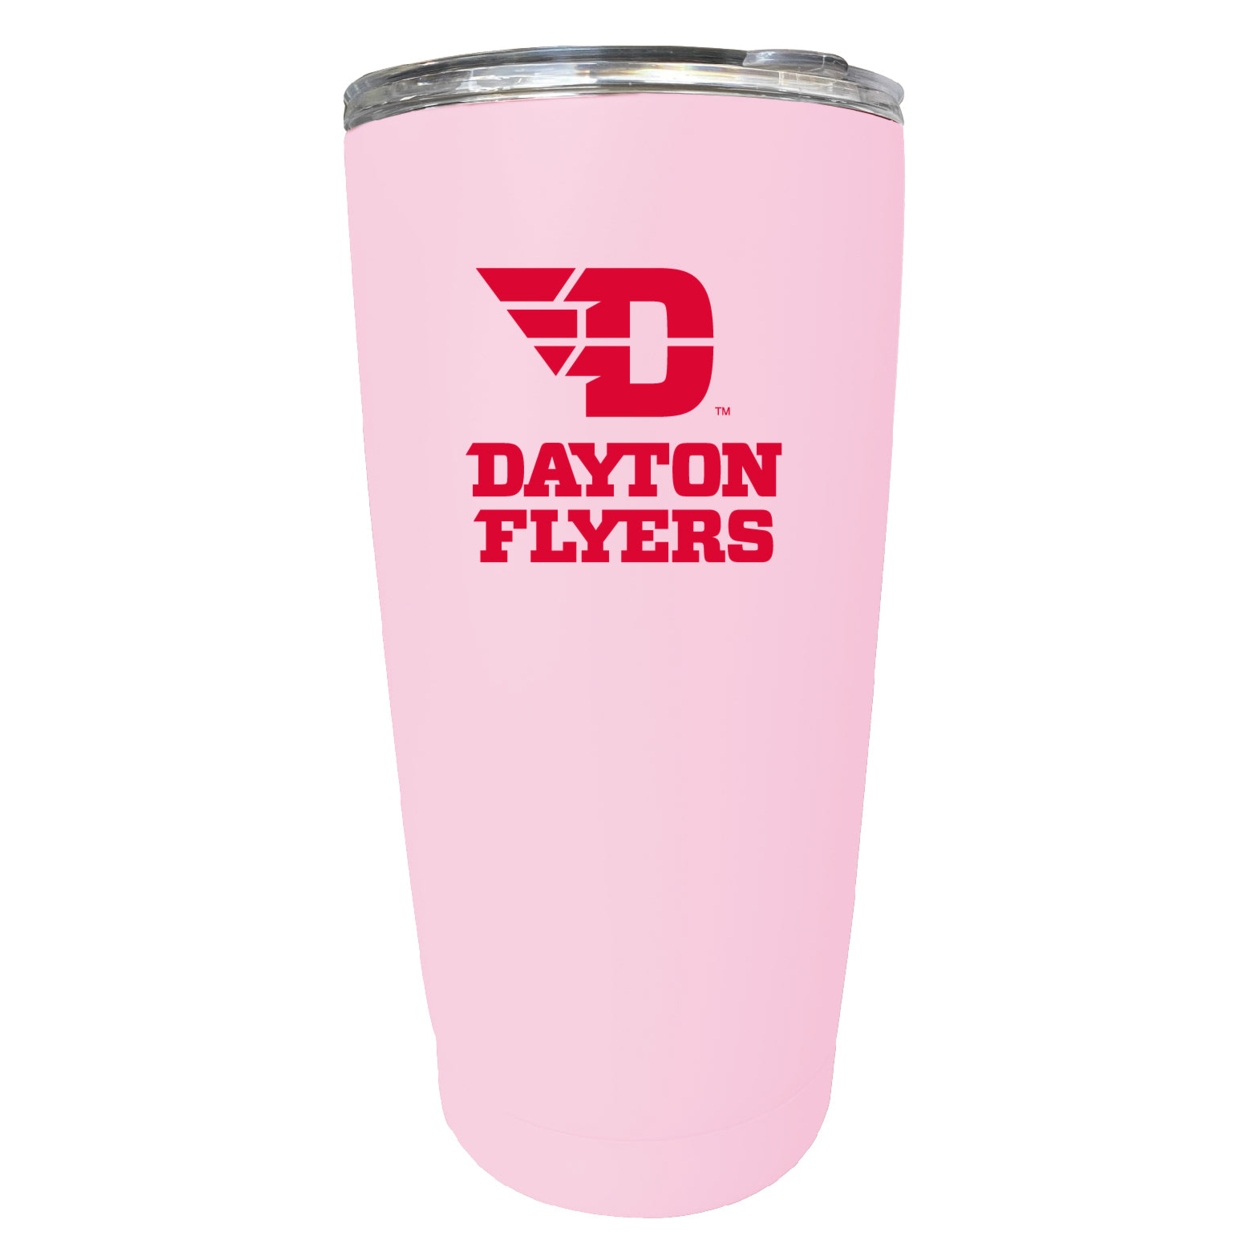 Dayton Flyers 16 Oz Stainless Steel Insulated Tumbler - Pink